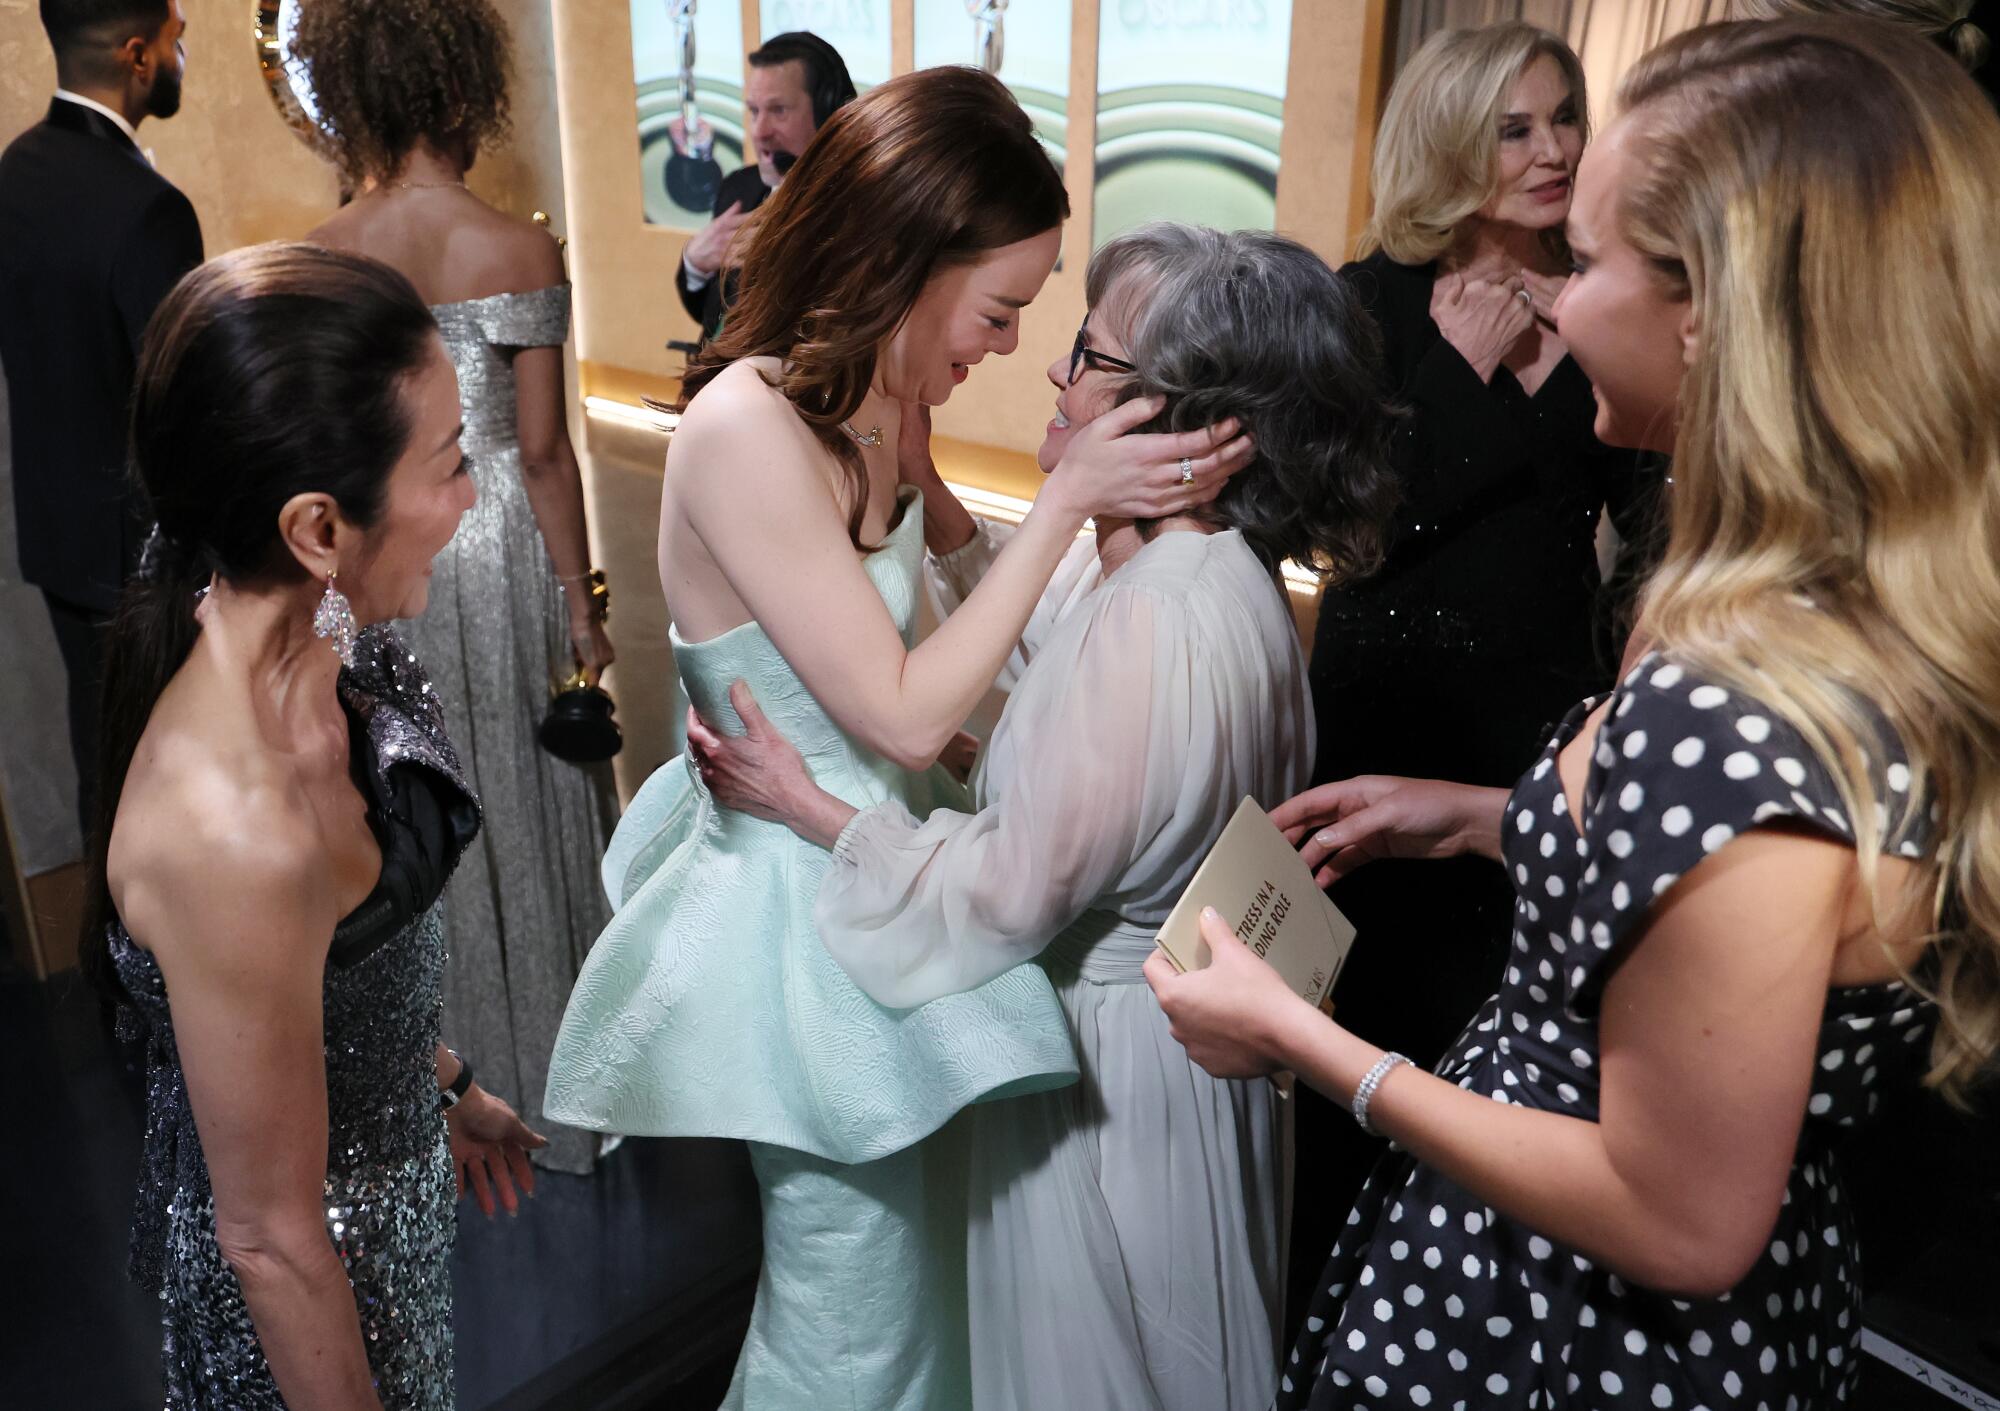 Emma Stone meets with Sally Field backstage after winning best actress.